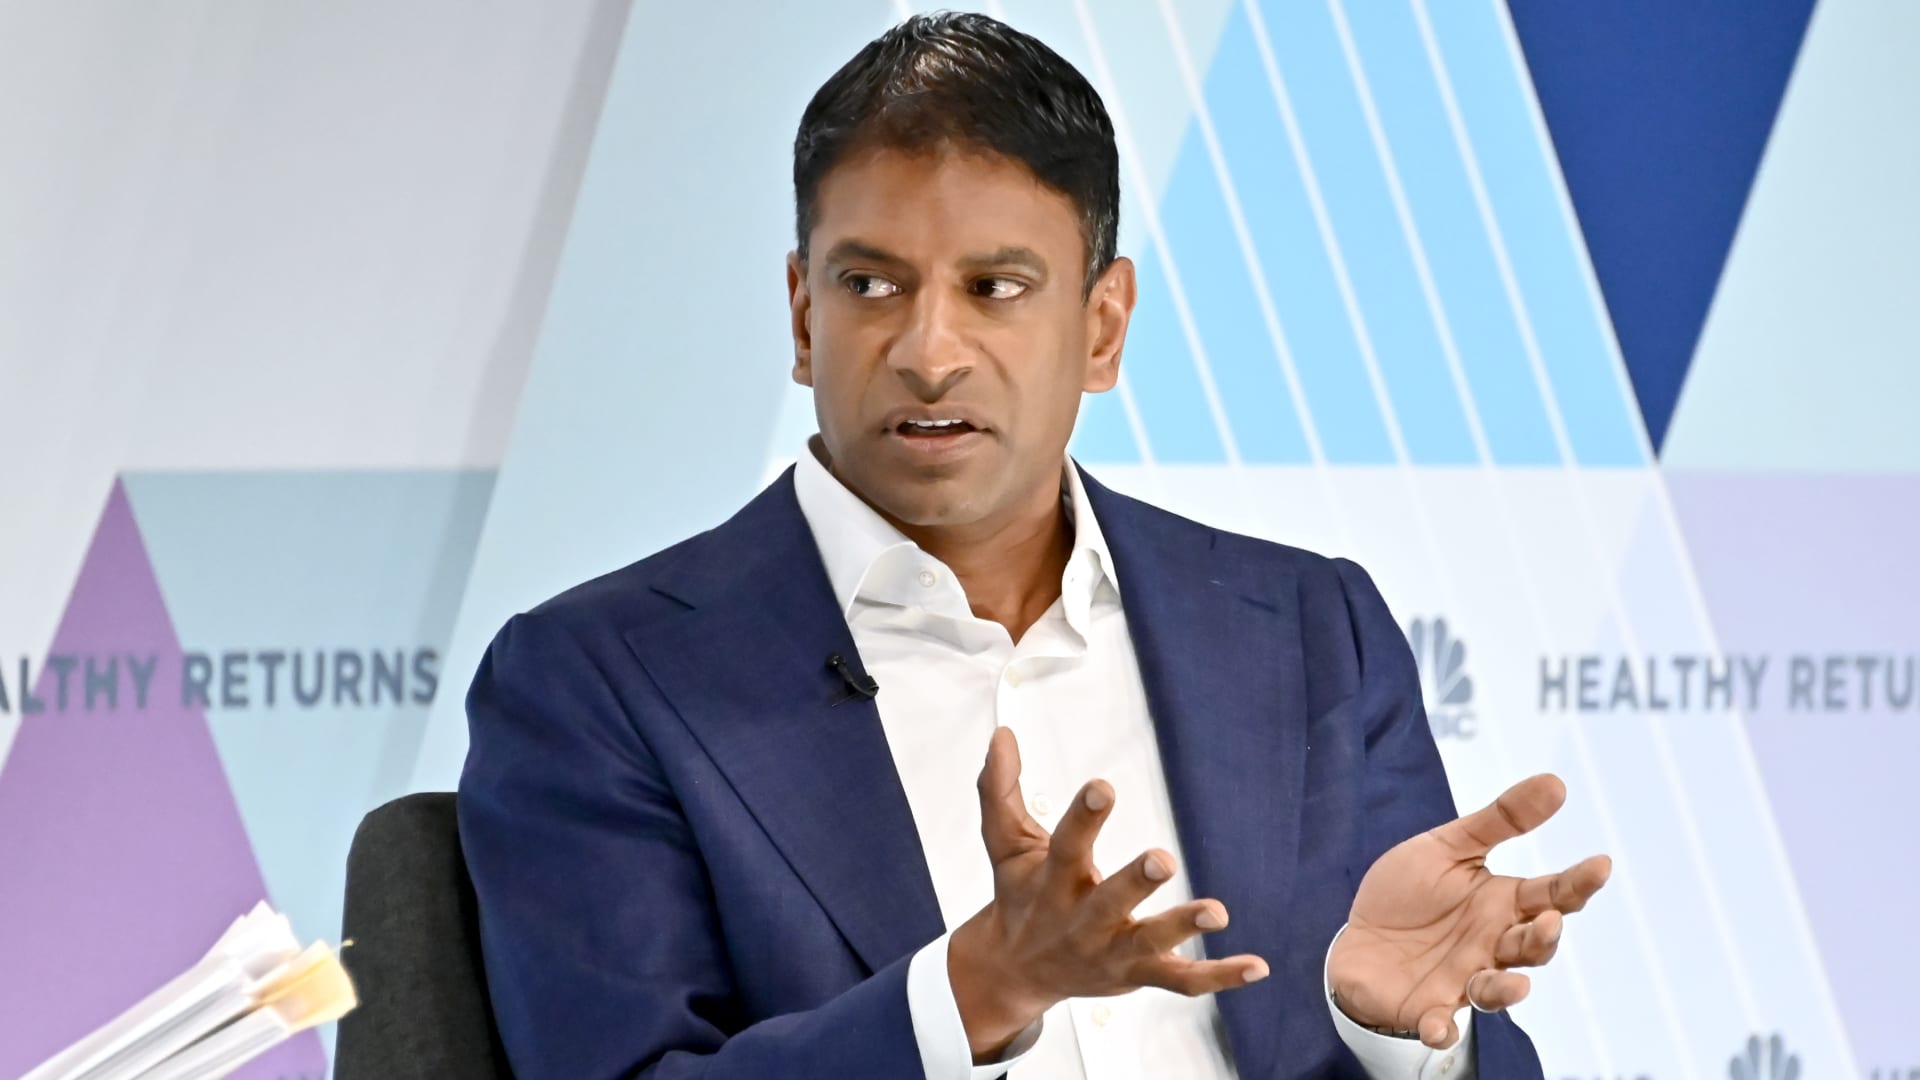 Dr. Vasant Narasimhan, CEO of Novartis, speaking at the Healthy Returns conference in New York City on May 21, 2019.